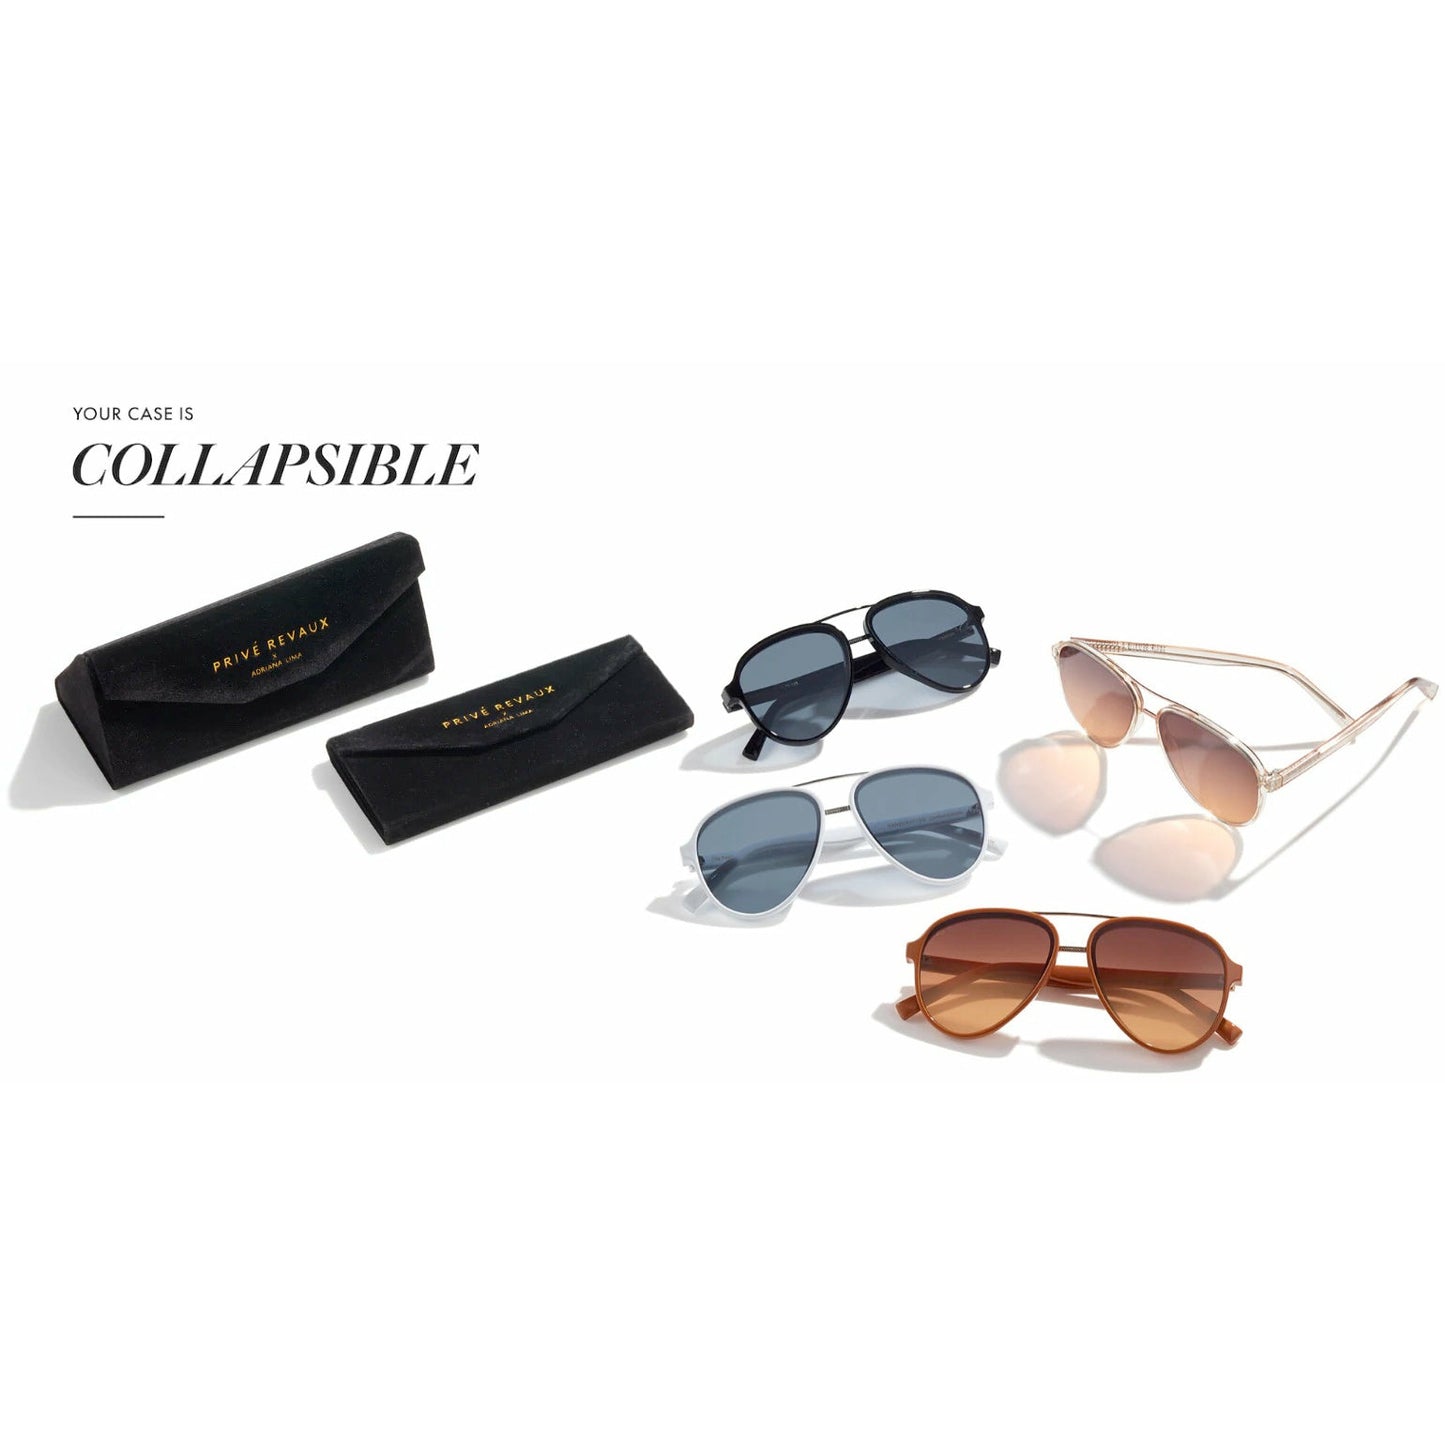 PRIVE REVAUX PANTHER x Adriana Lima - Toffee Sunglasses